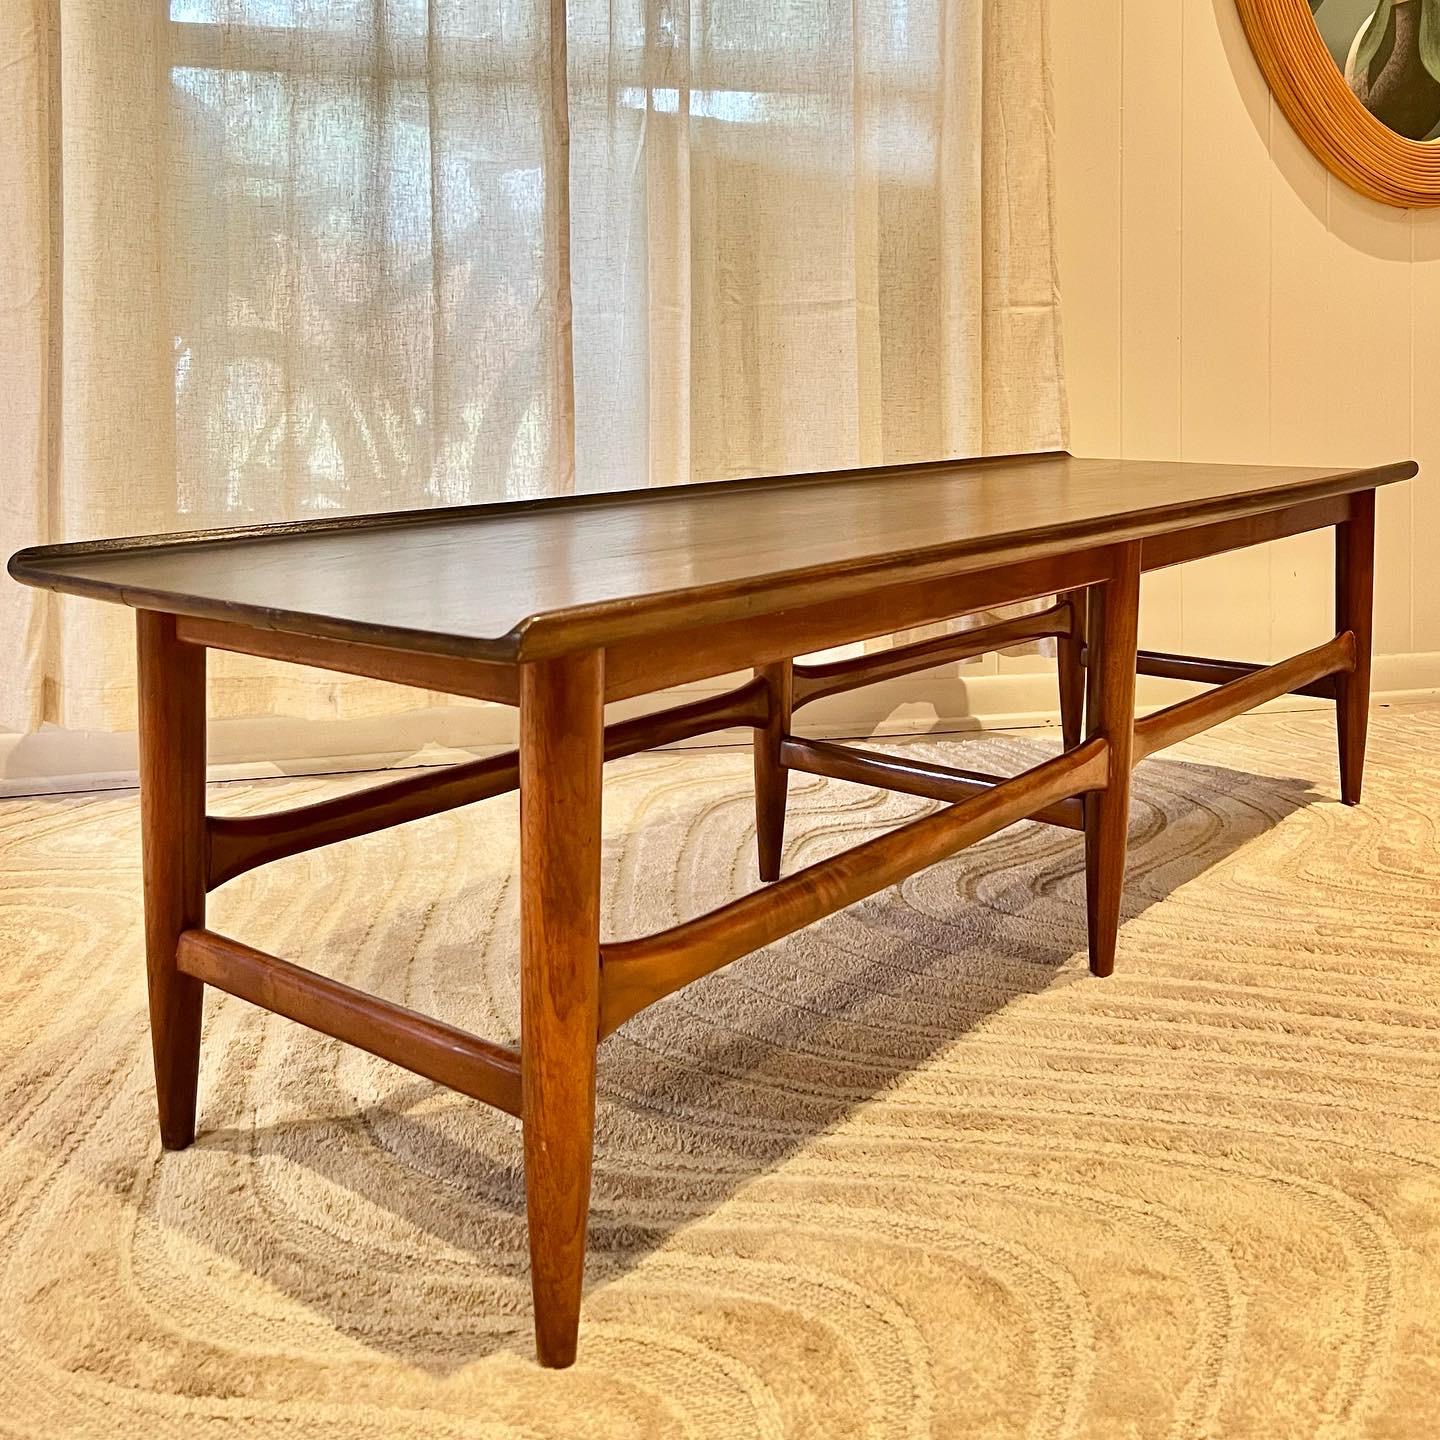 Vintage Mid-Century Modern coffee table with lots of curves and tapered legs. This beauty is 60 inches wide and has lots of space for all of your books and things! Overall in very good original condition. 

Dimensions:
16” H x 18” D x 60” W.
  